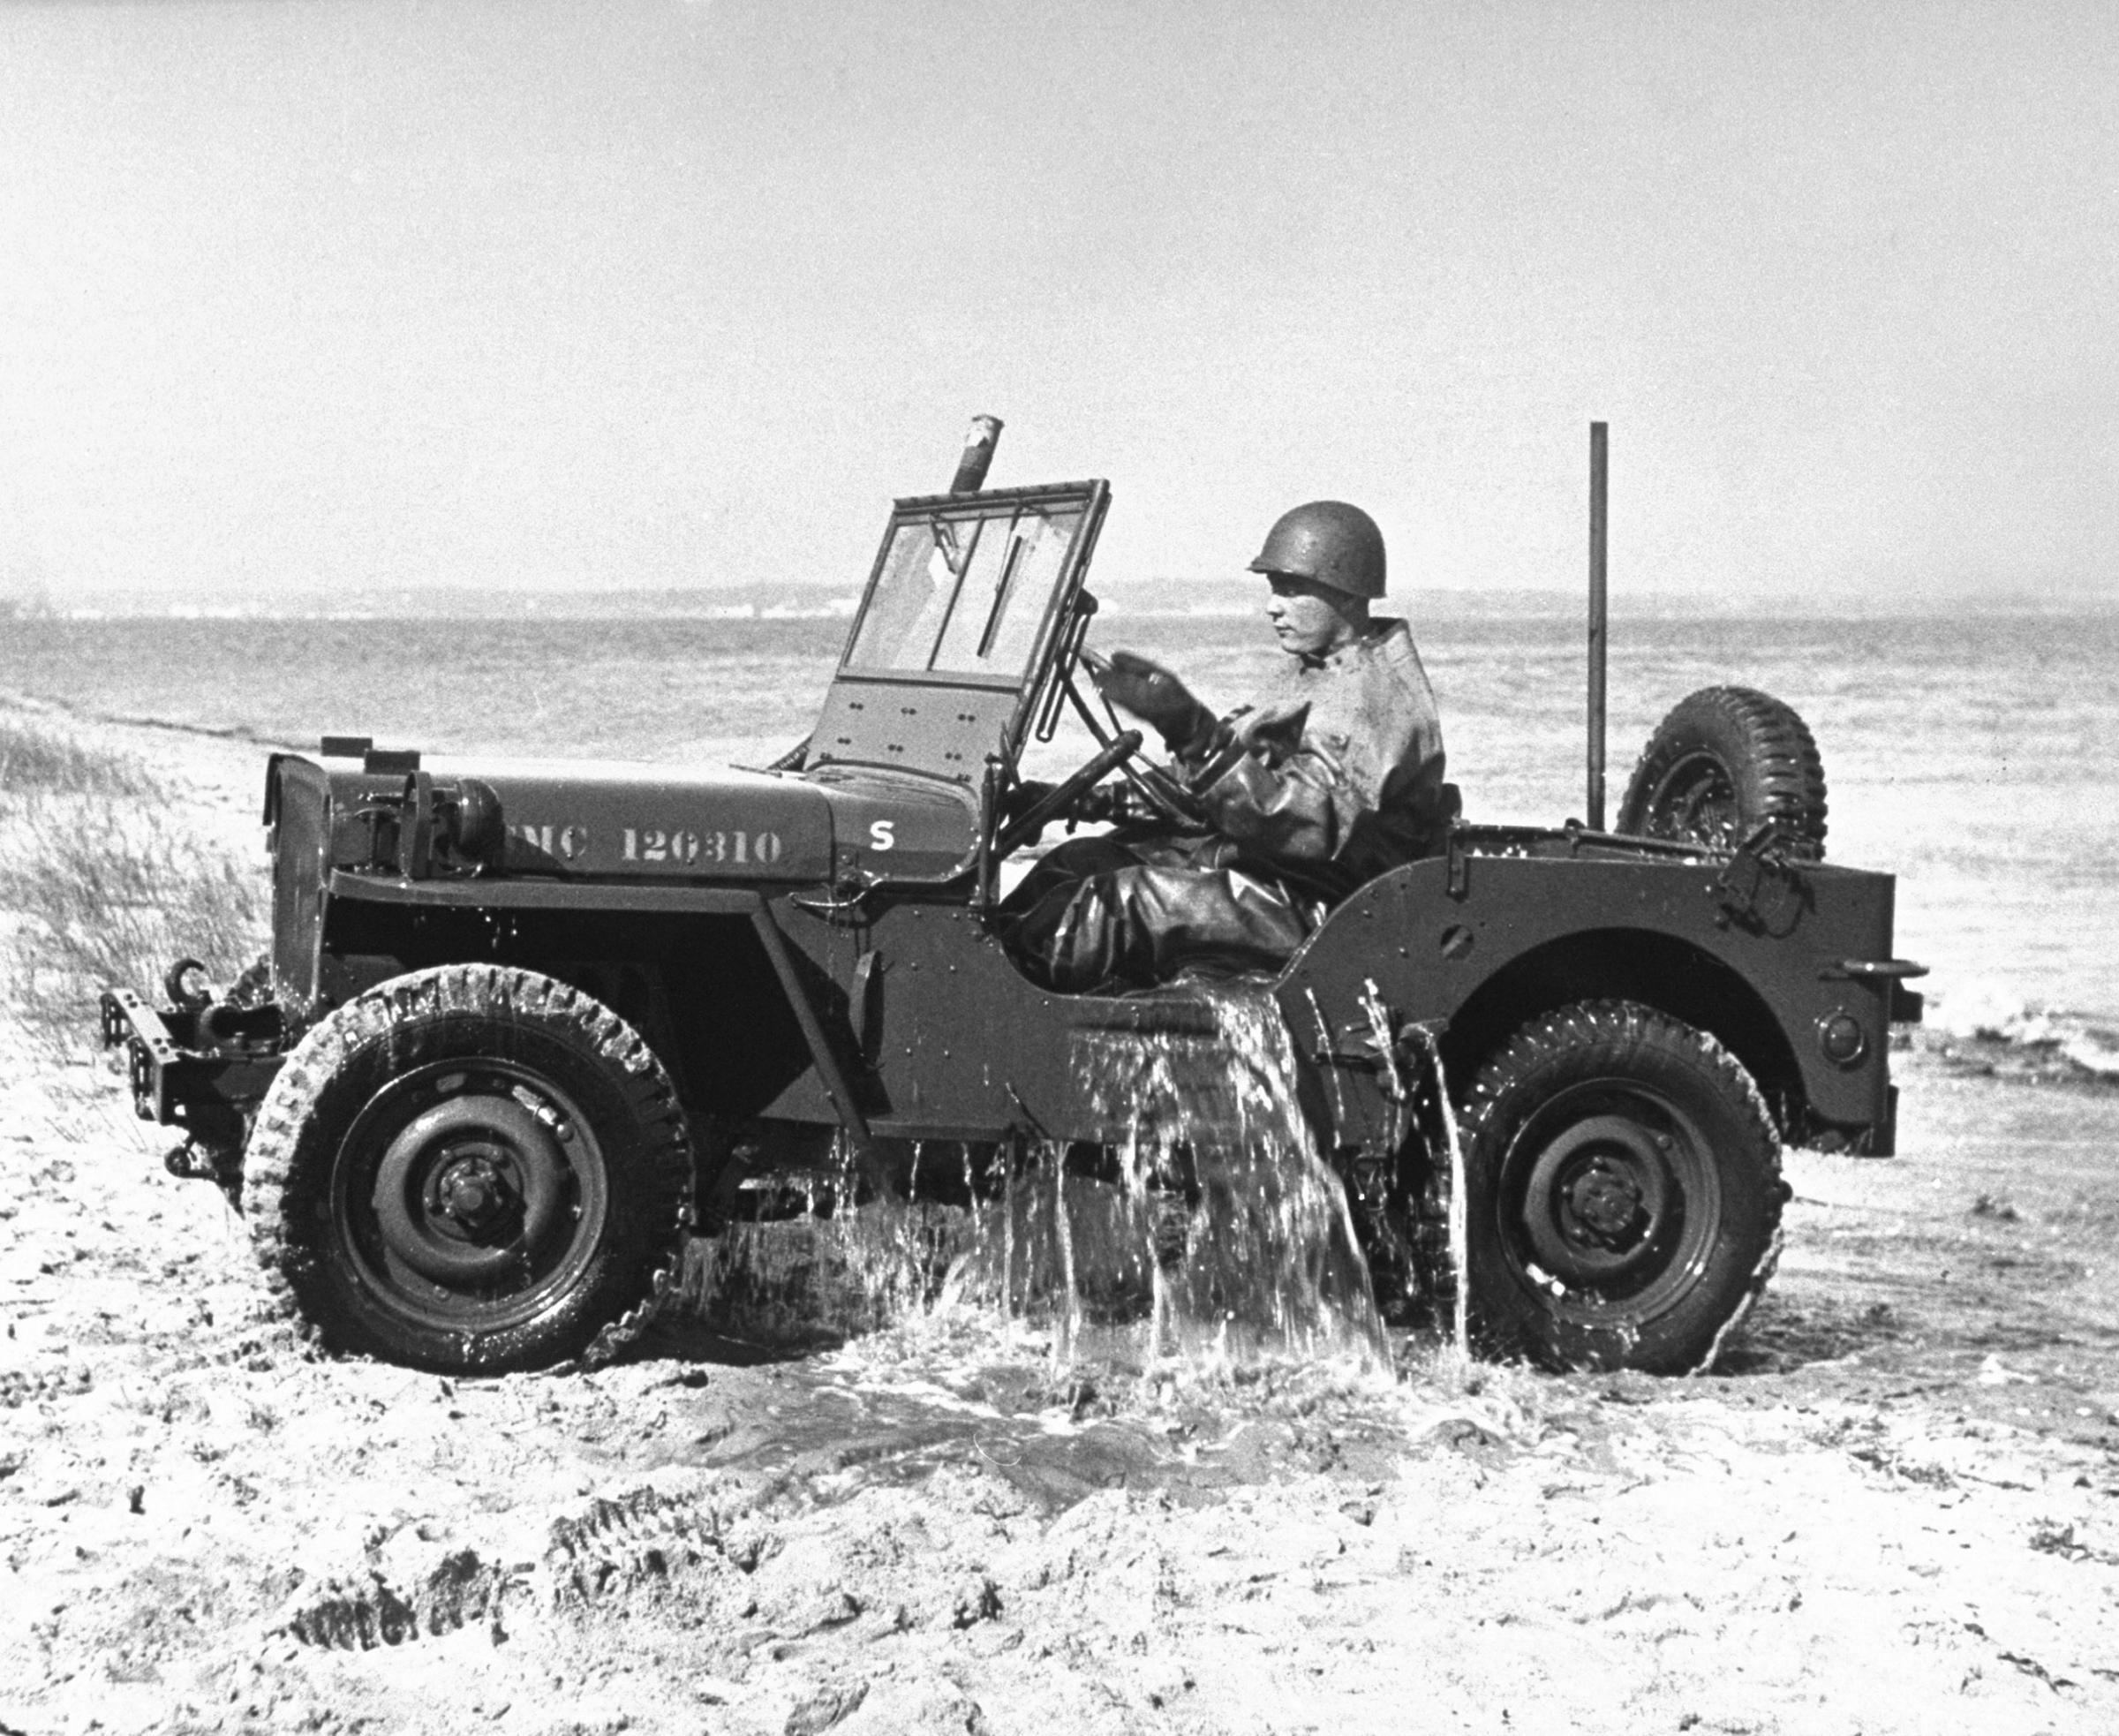 A soldier drives a Jeep out of the water in 1946.